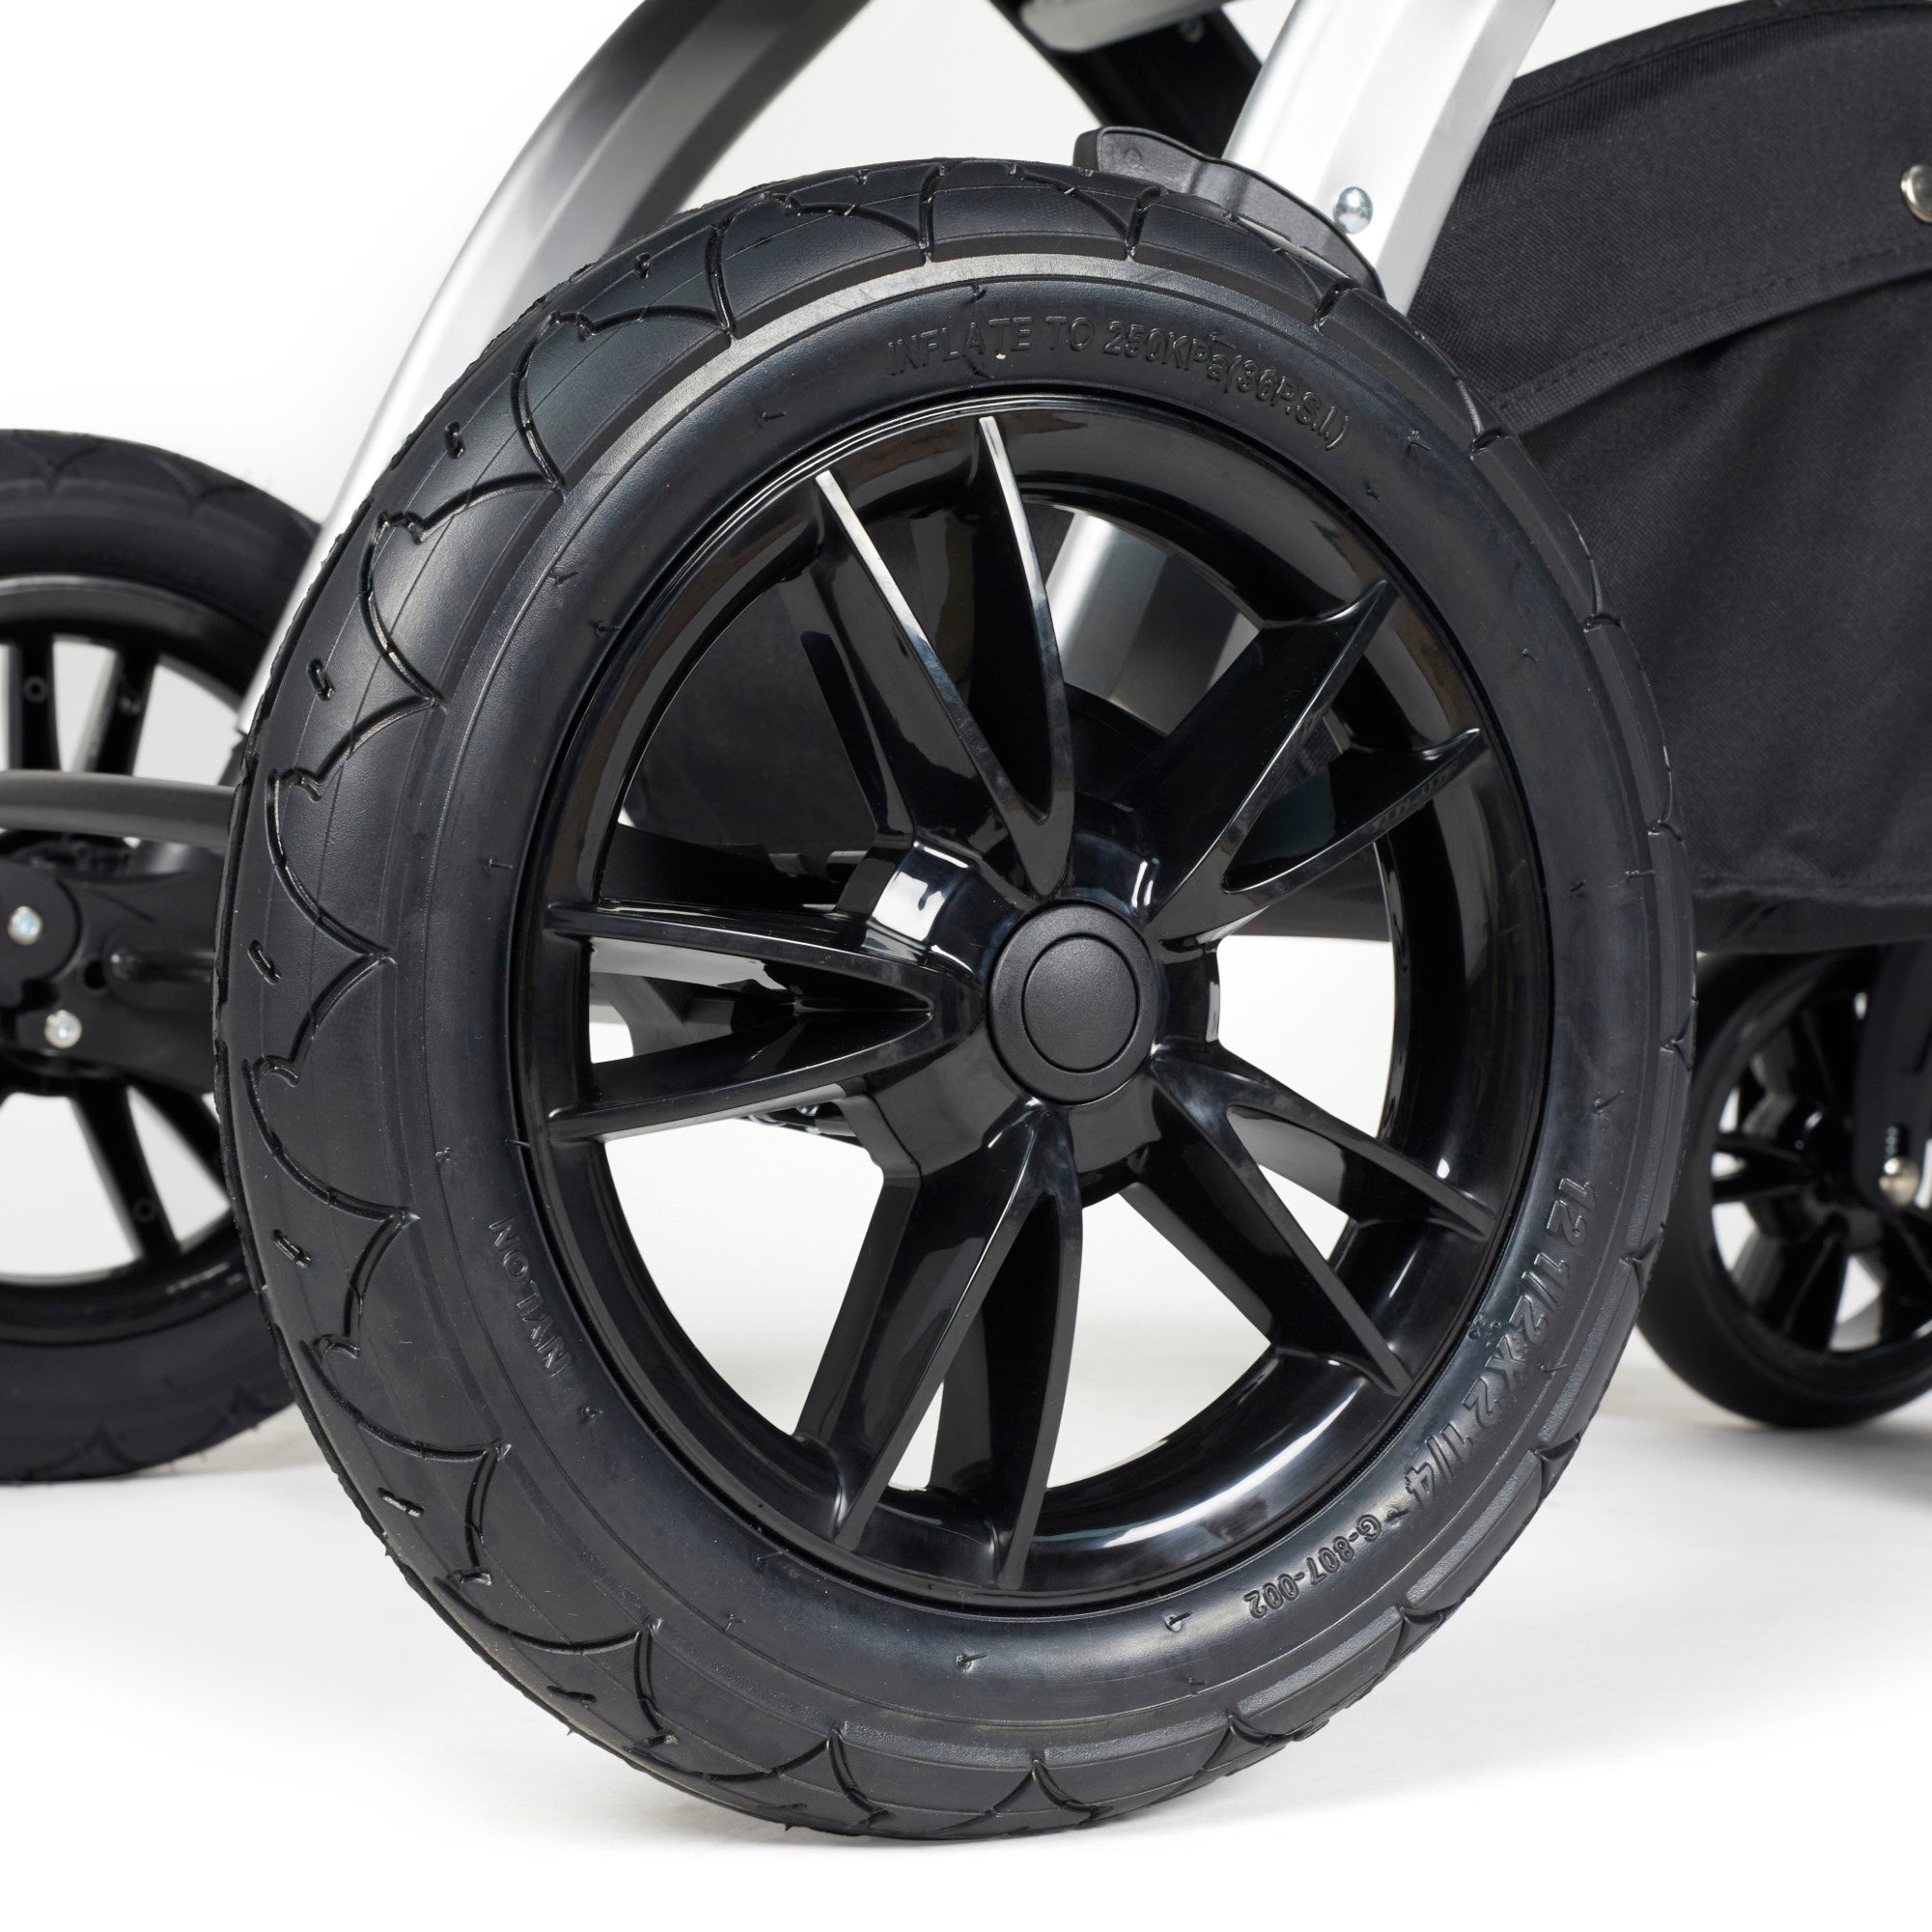 Ickle Bubba Stomp Luxe Stratus Travel System - Black/Charcoal Grey